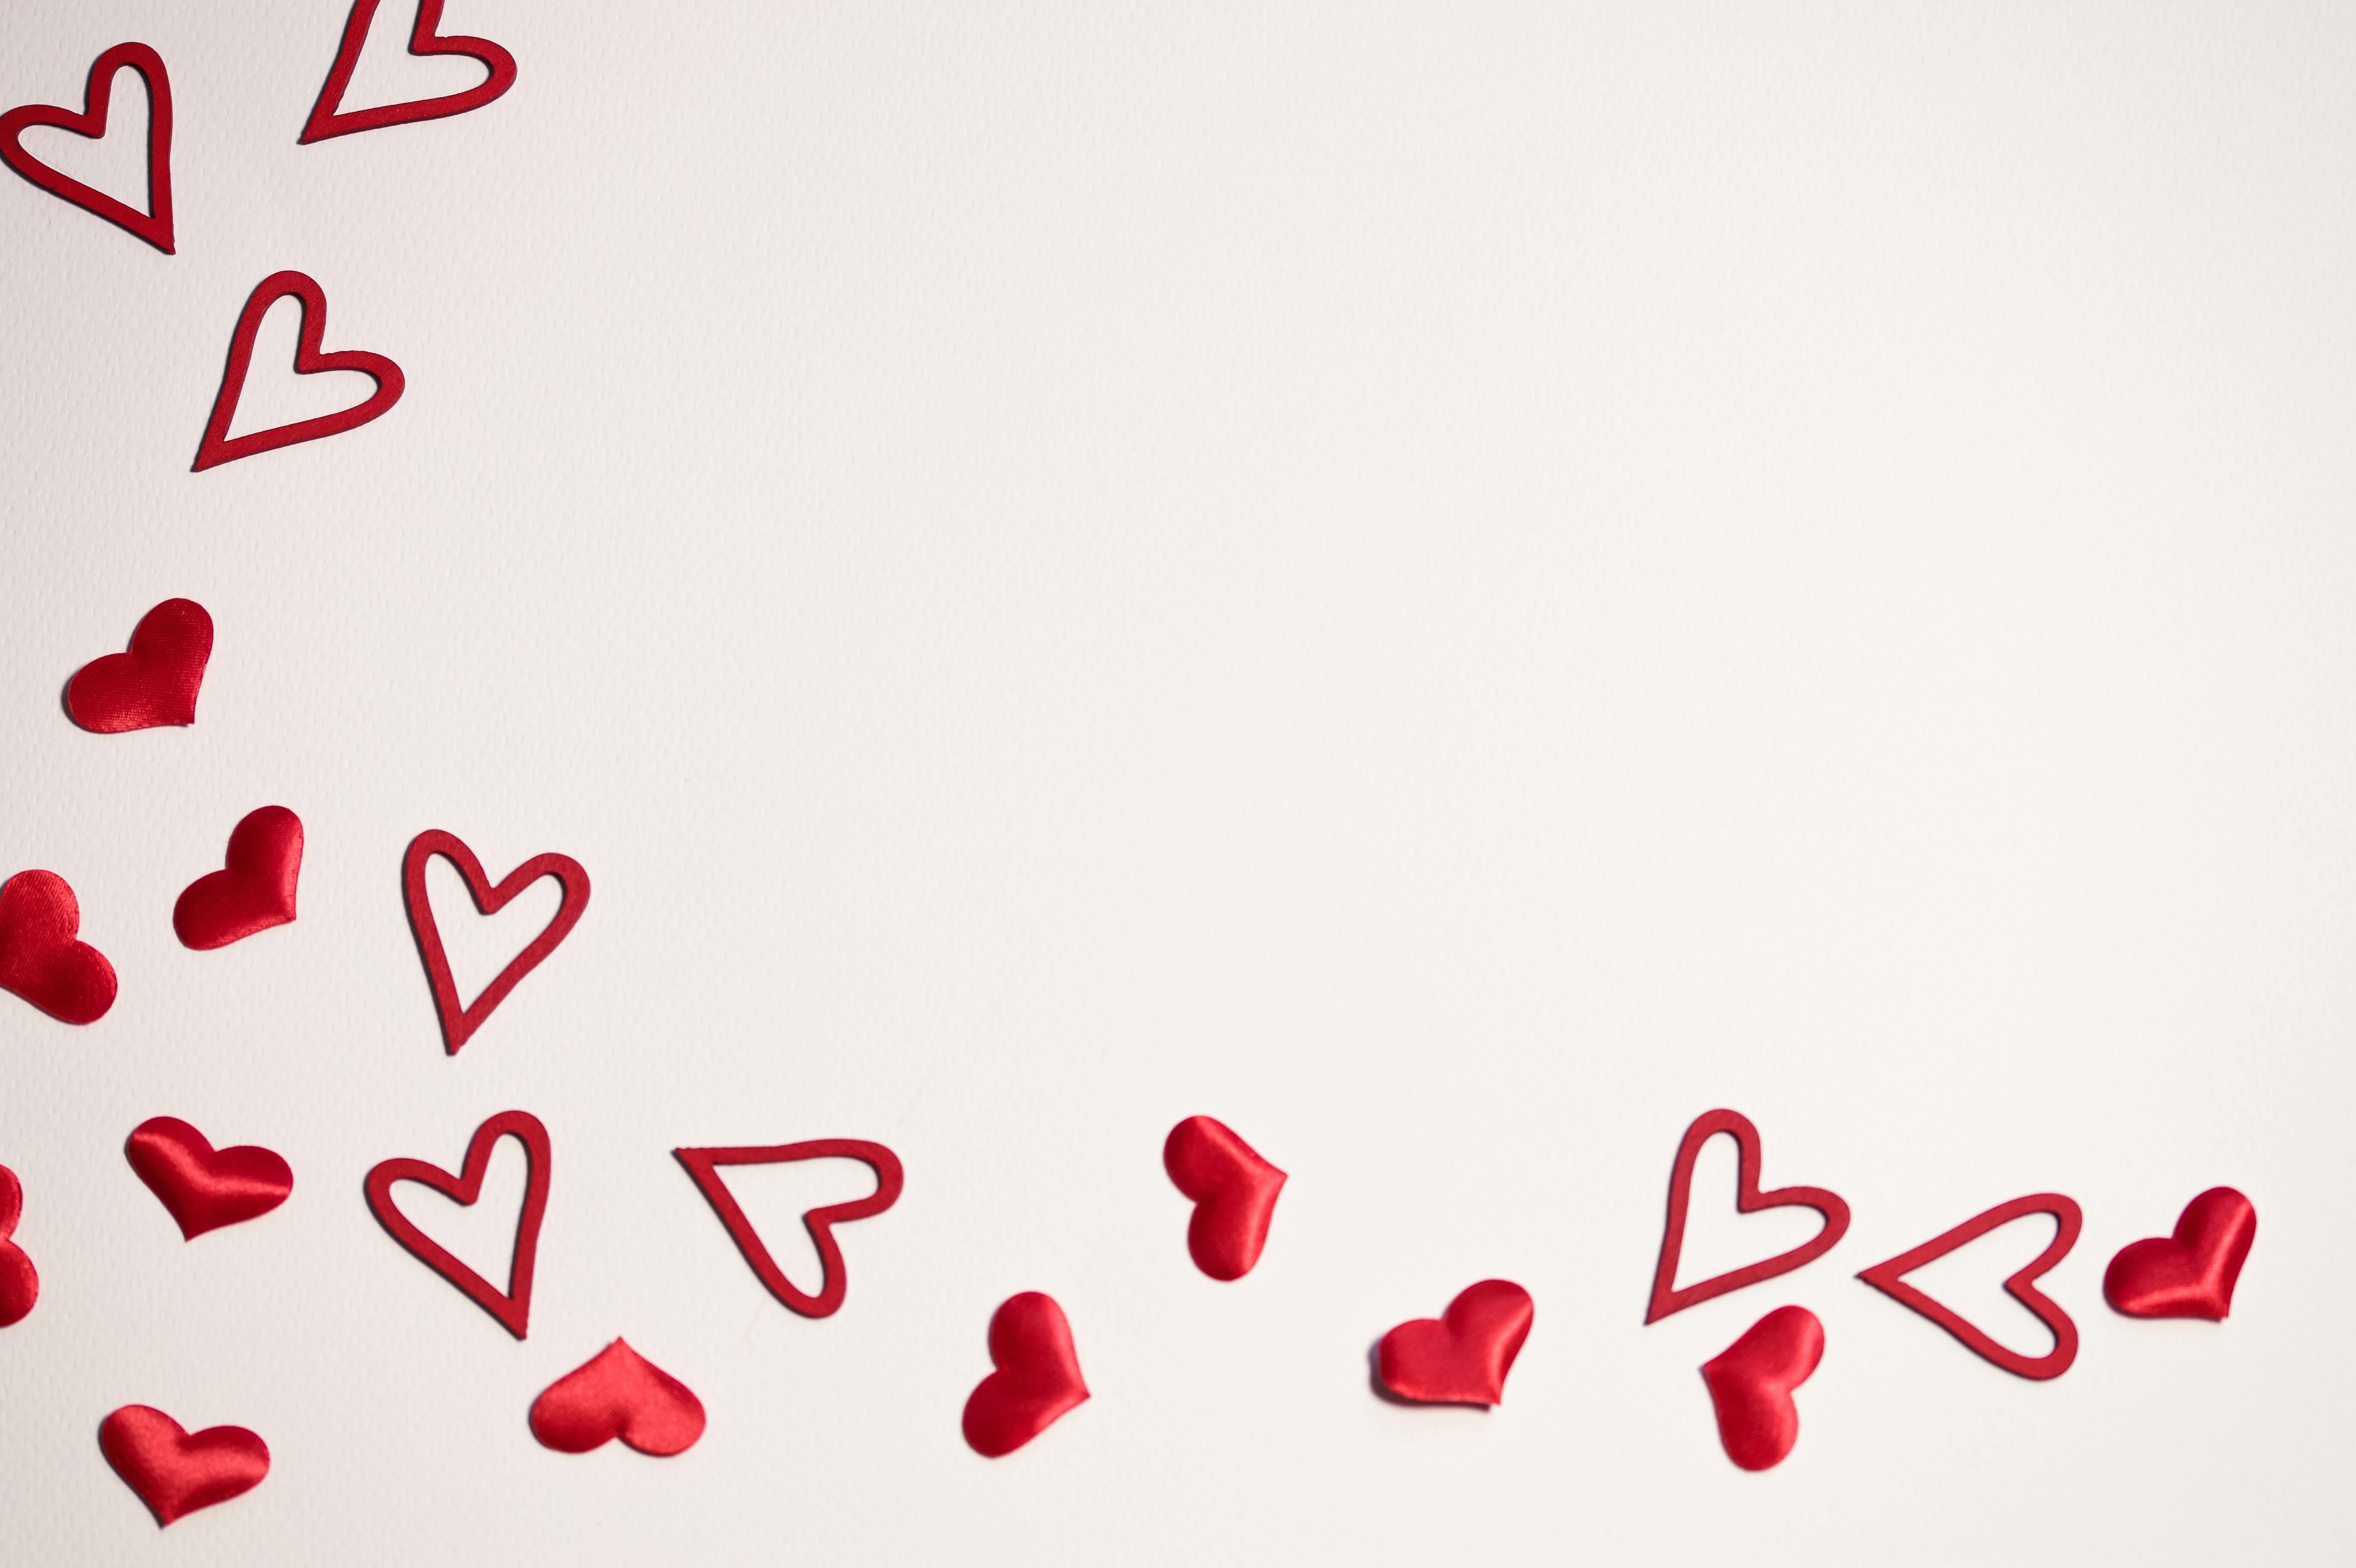 Cute Heart Background Images  Free Download on Freepik